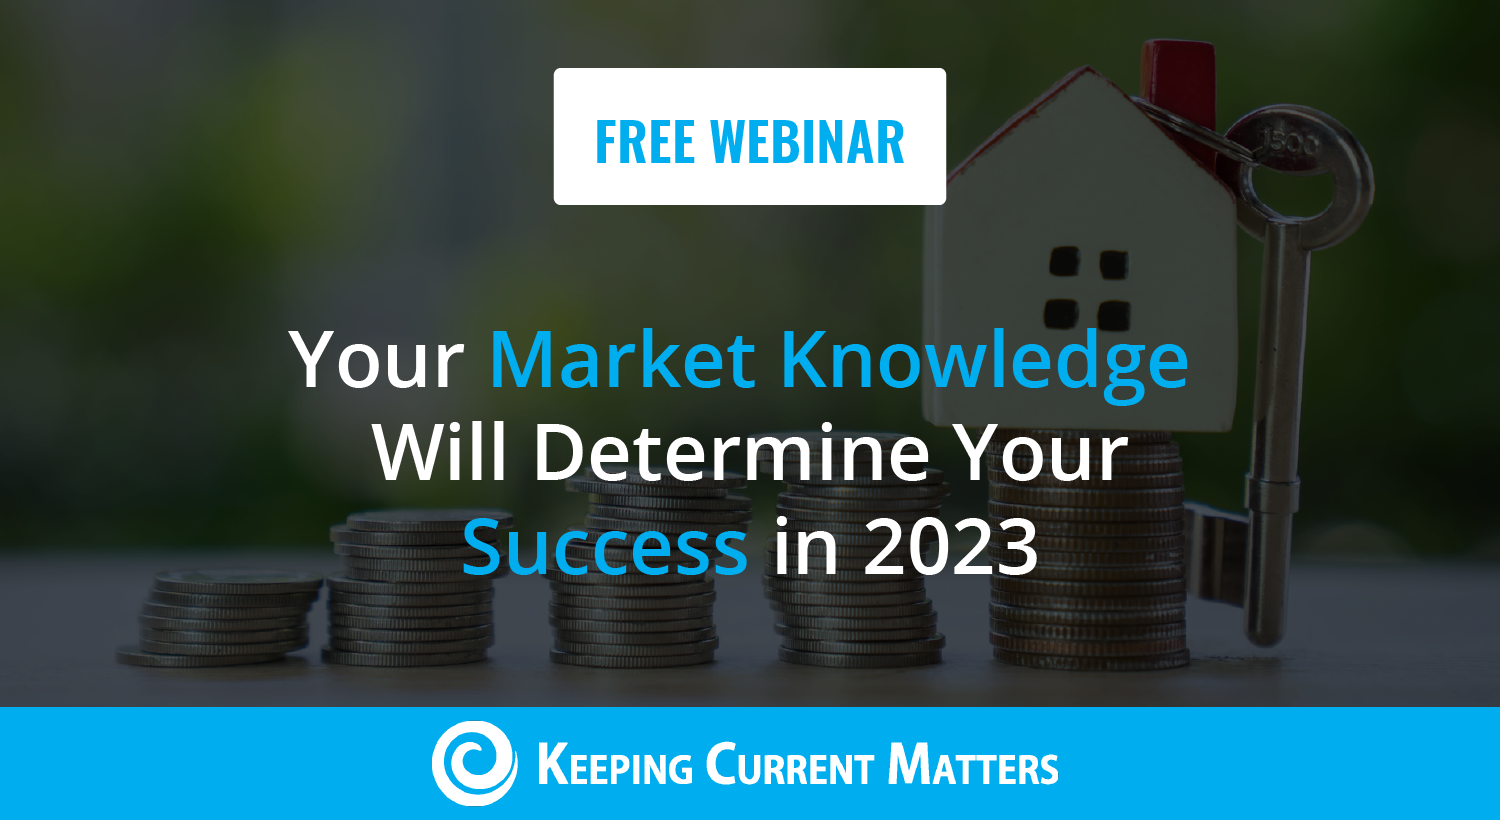  webinar-january-WP-Featured-Image [:en]Your Market Knowledge Will Determine Your Success in 2023 [LIVE WEBINAR][:]  